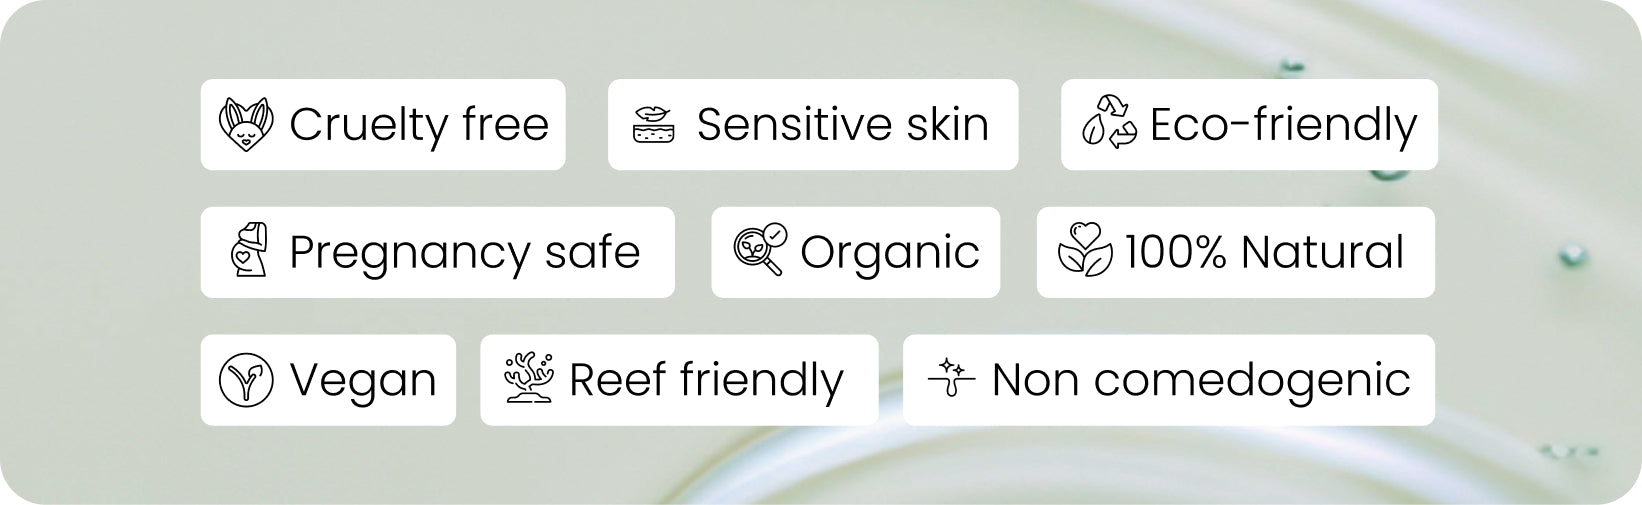 Clean skincare Pictogrammes